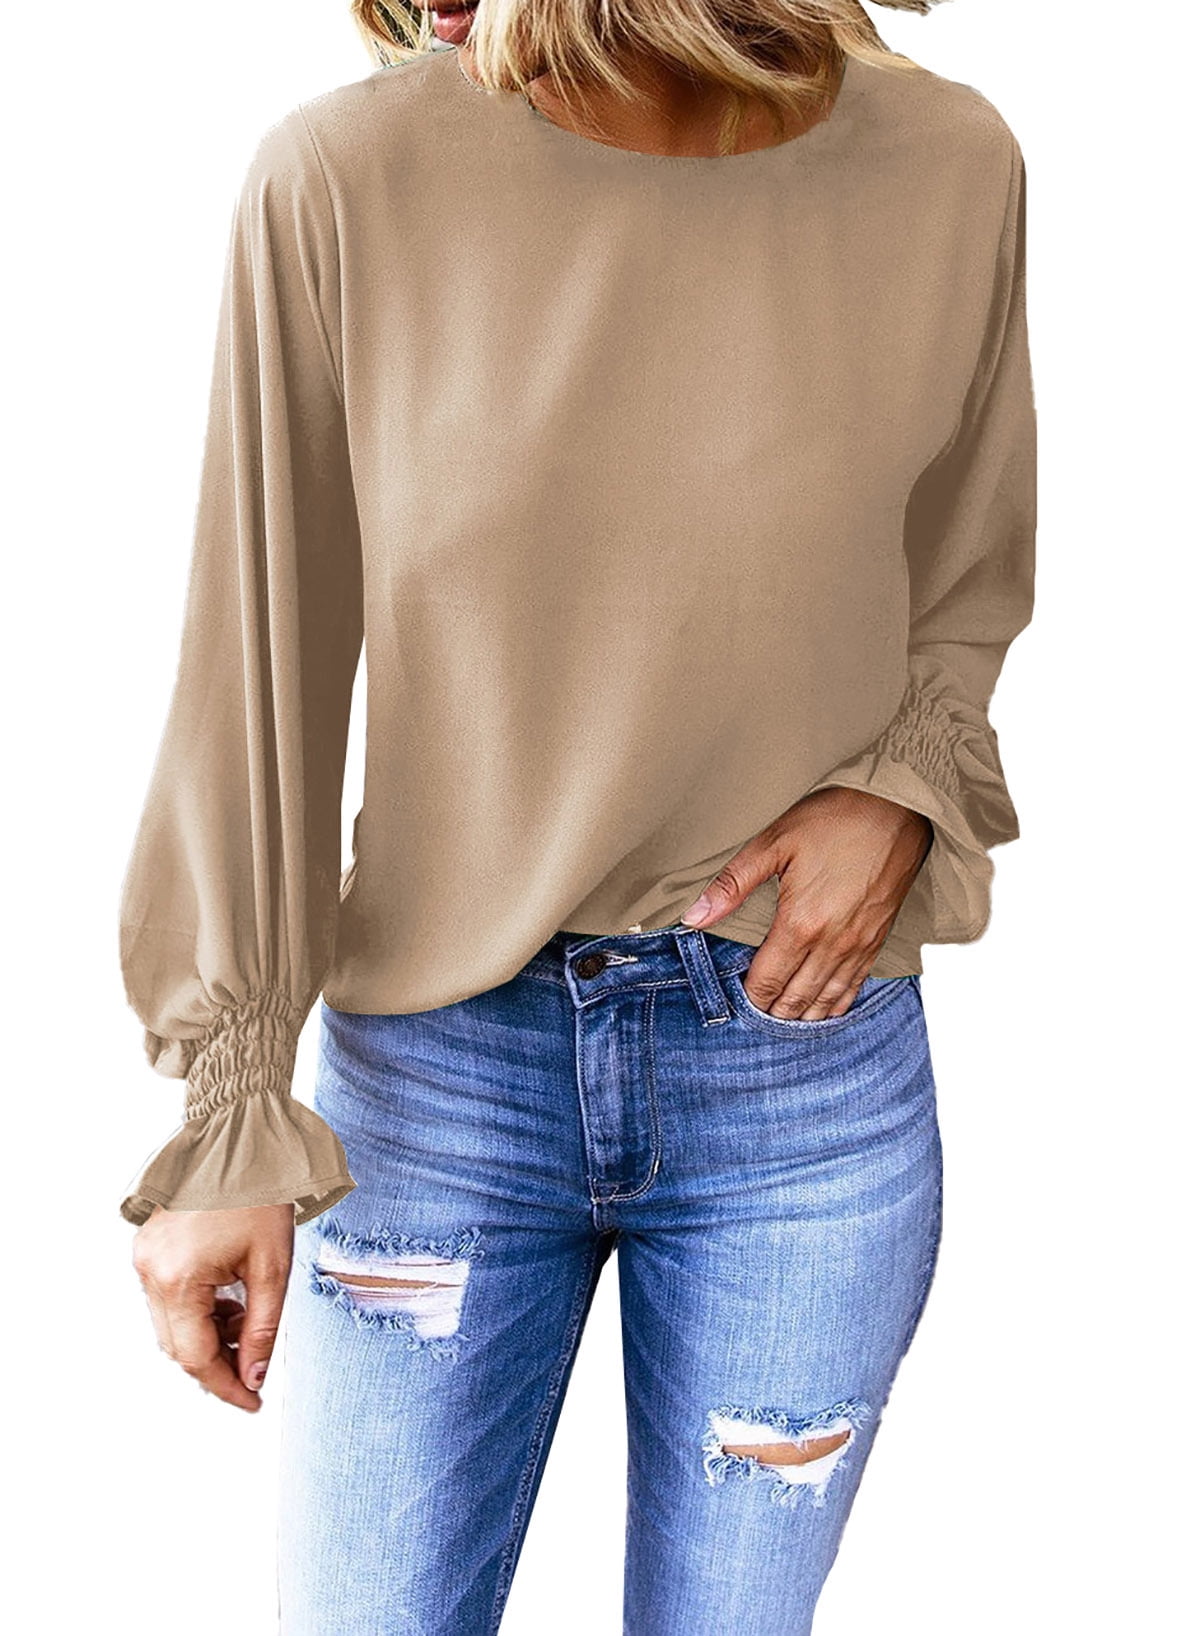 EVALESS Womens Long Sleeve Shirts Casual Loose Blouses Pullover Tops 